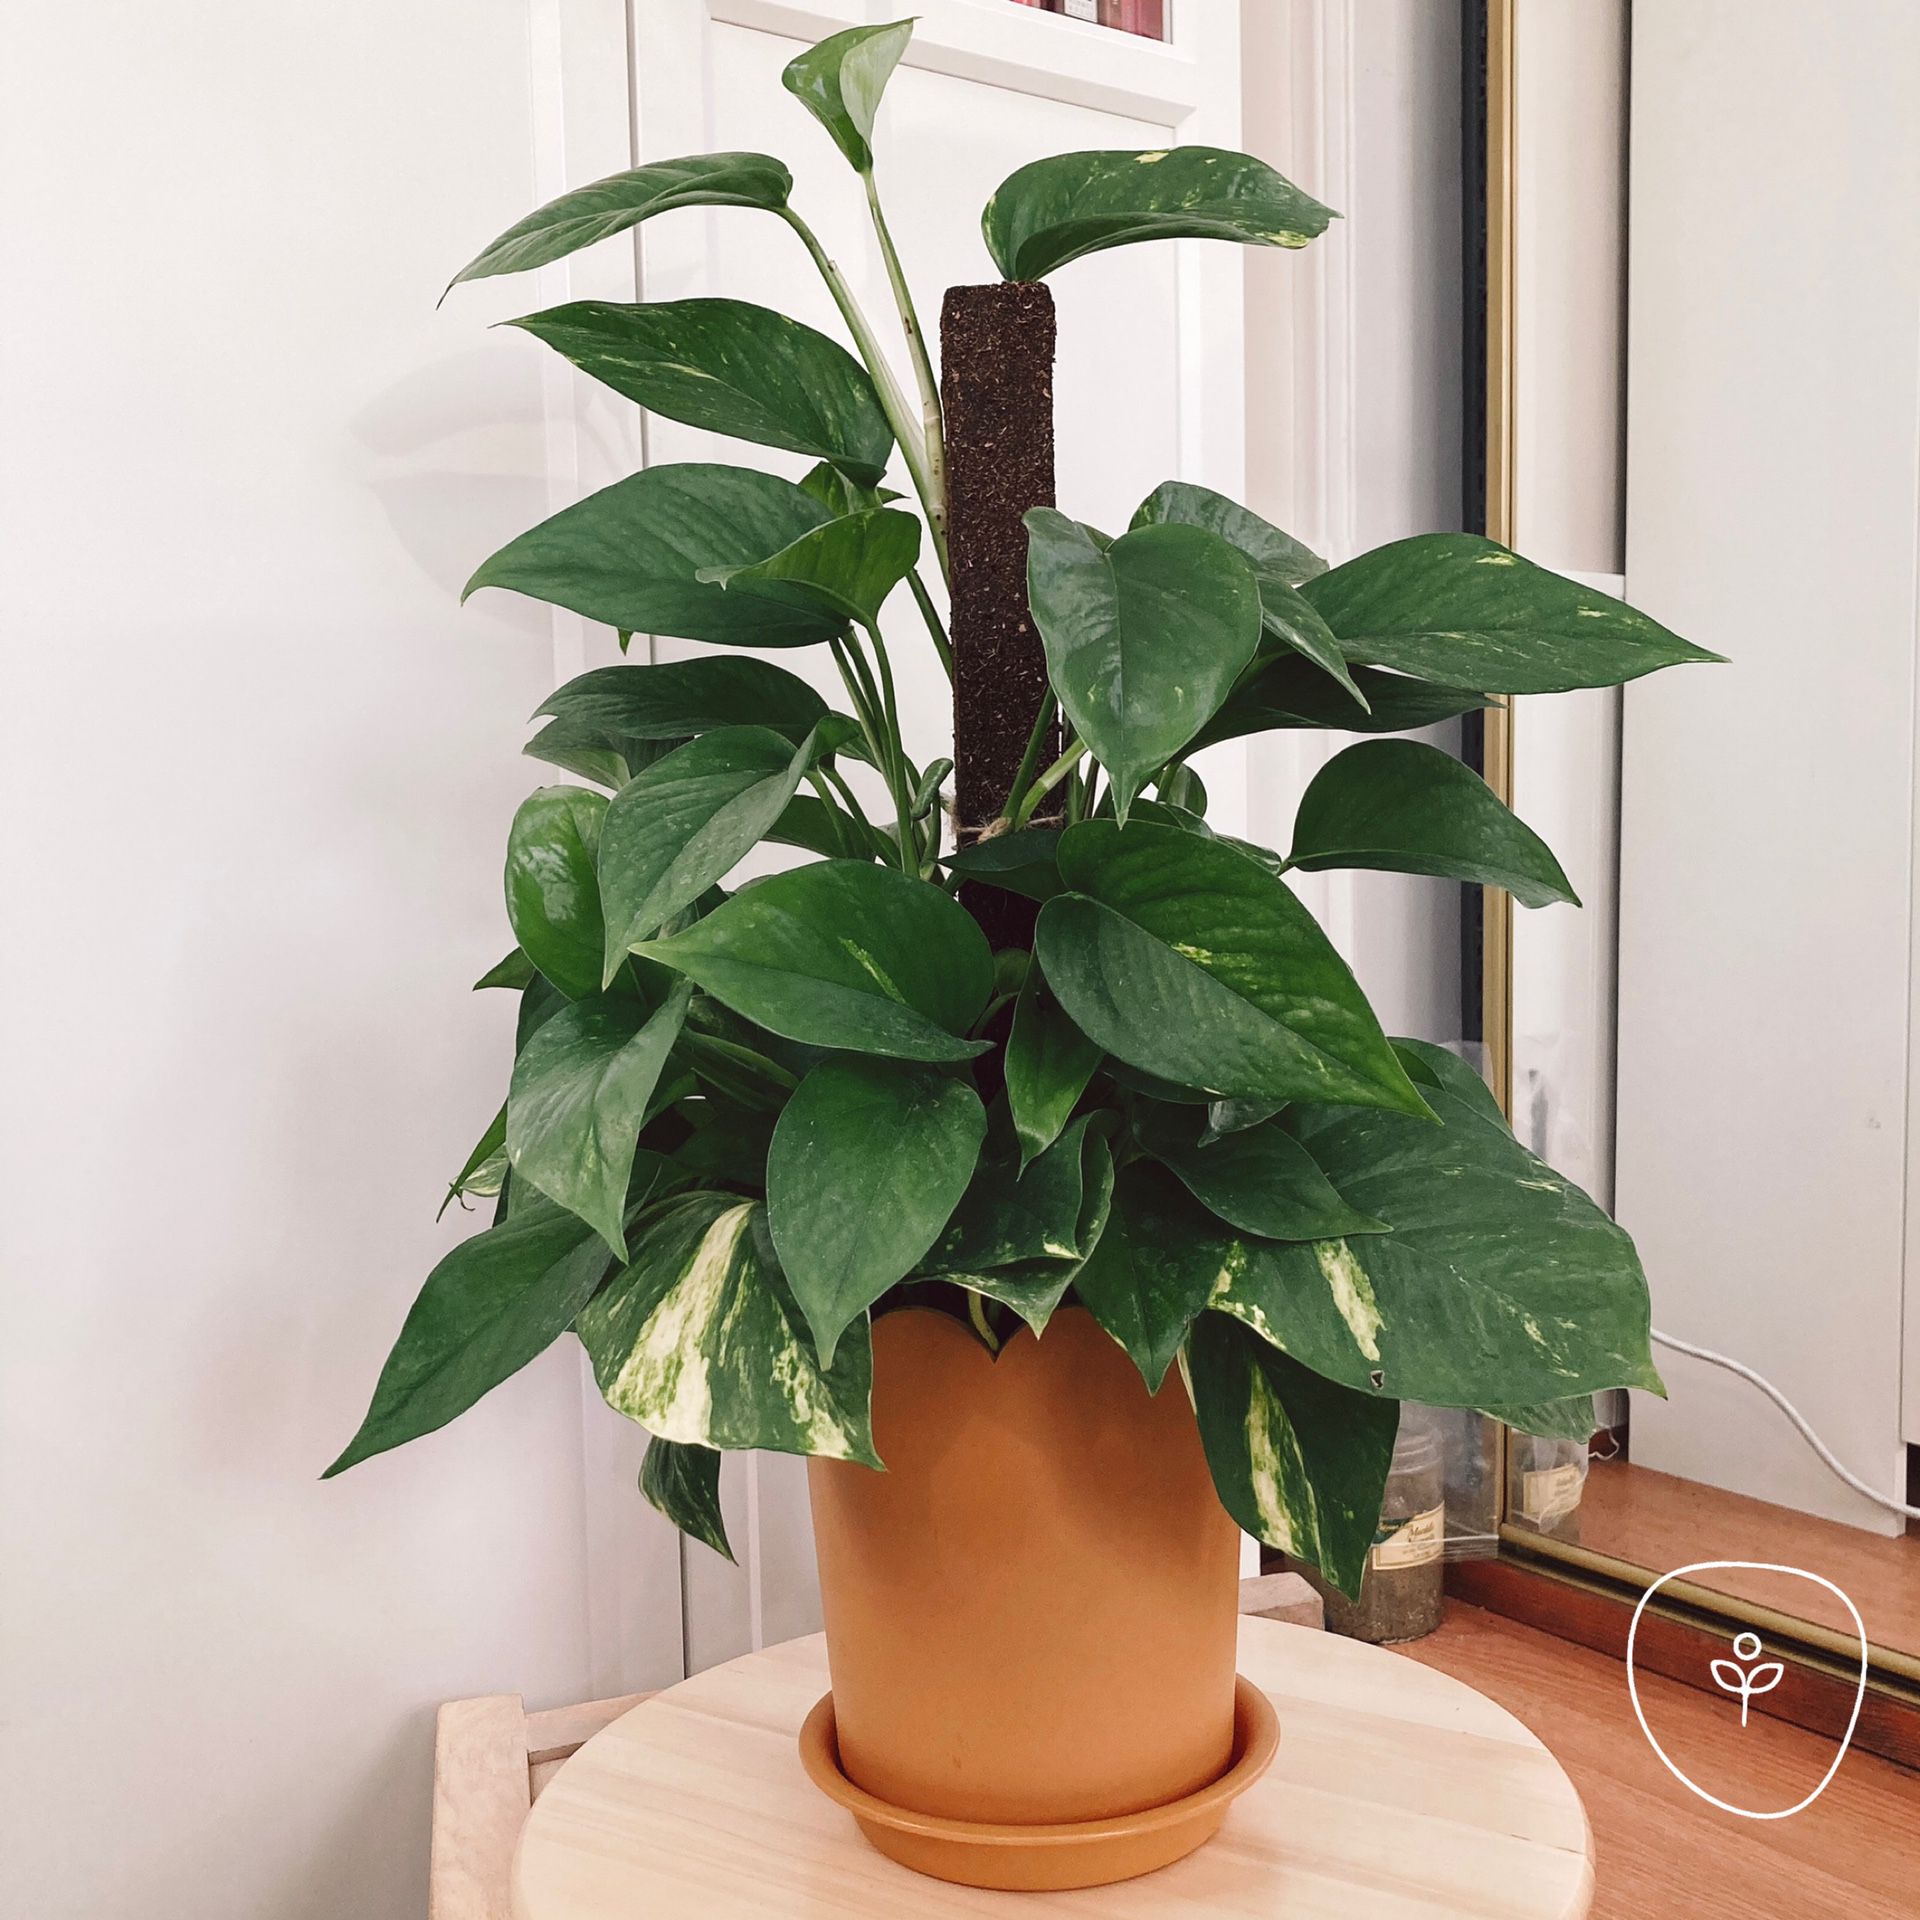 Staked Golden Pothos with Support Pole